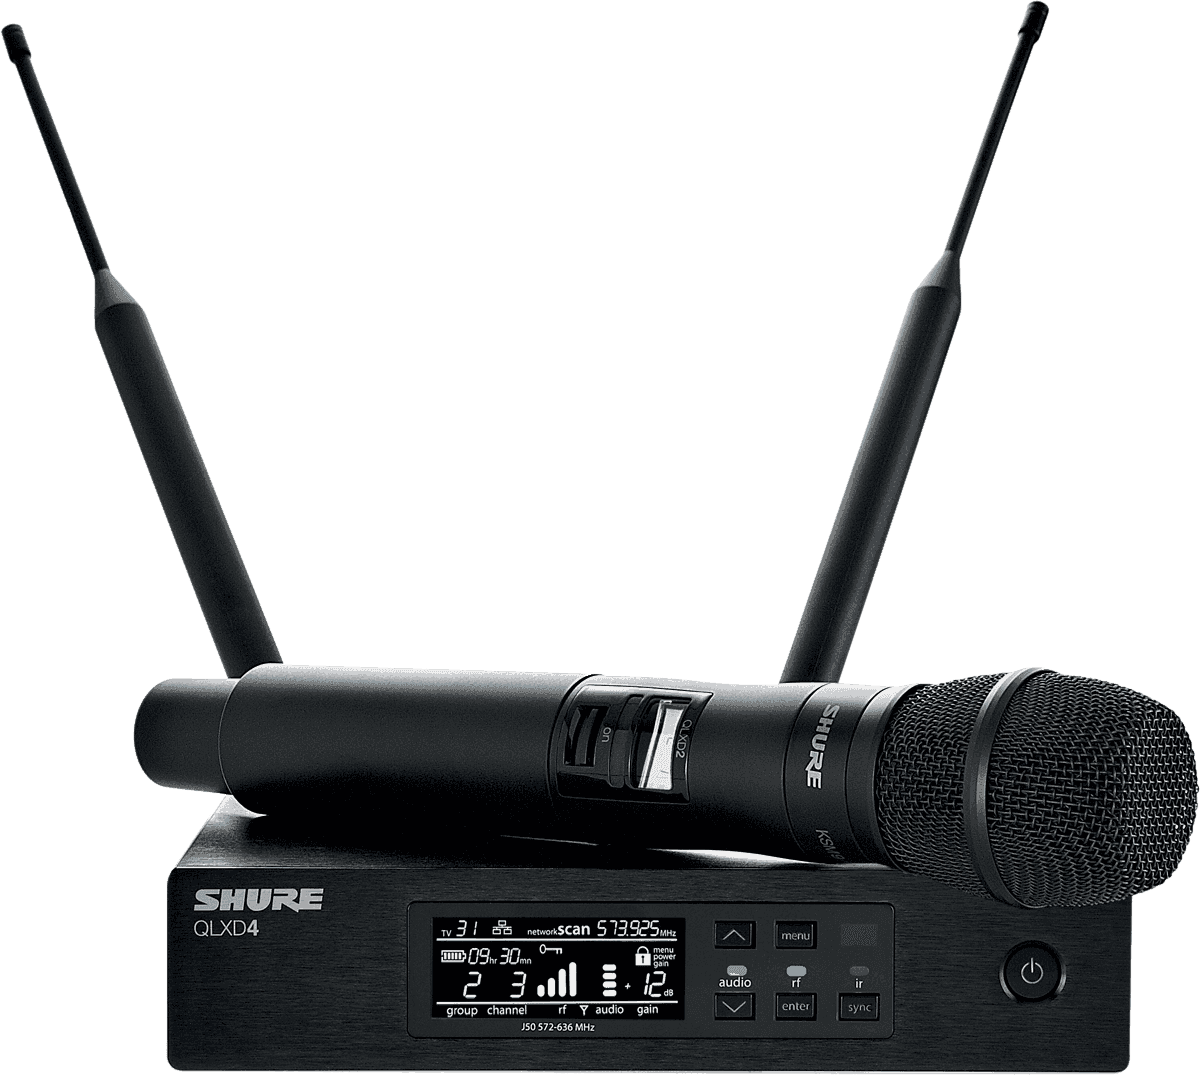 Shure Qlxd24-ksm9-h51 - Wireless handheld microphone - Main picture